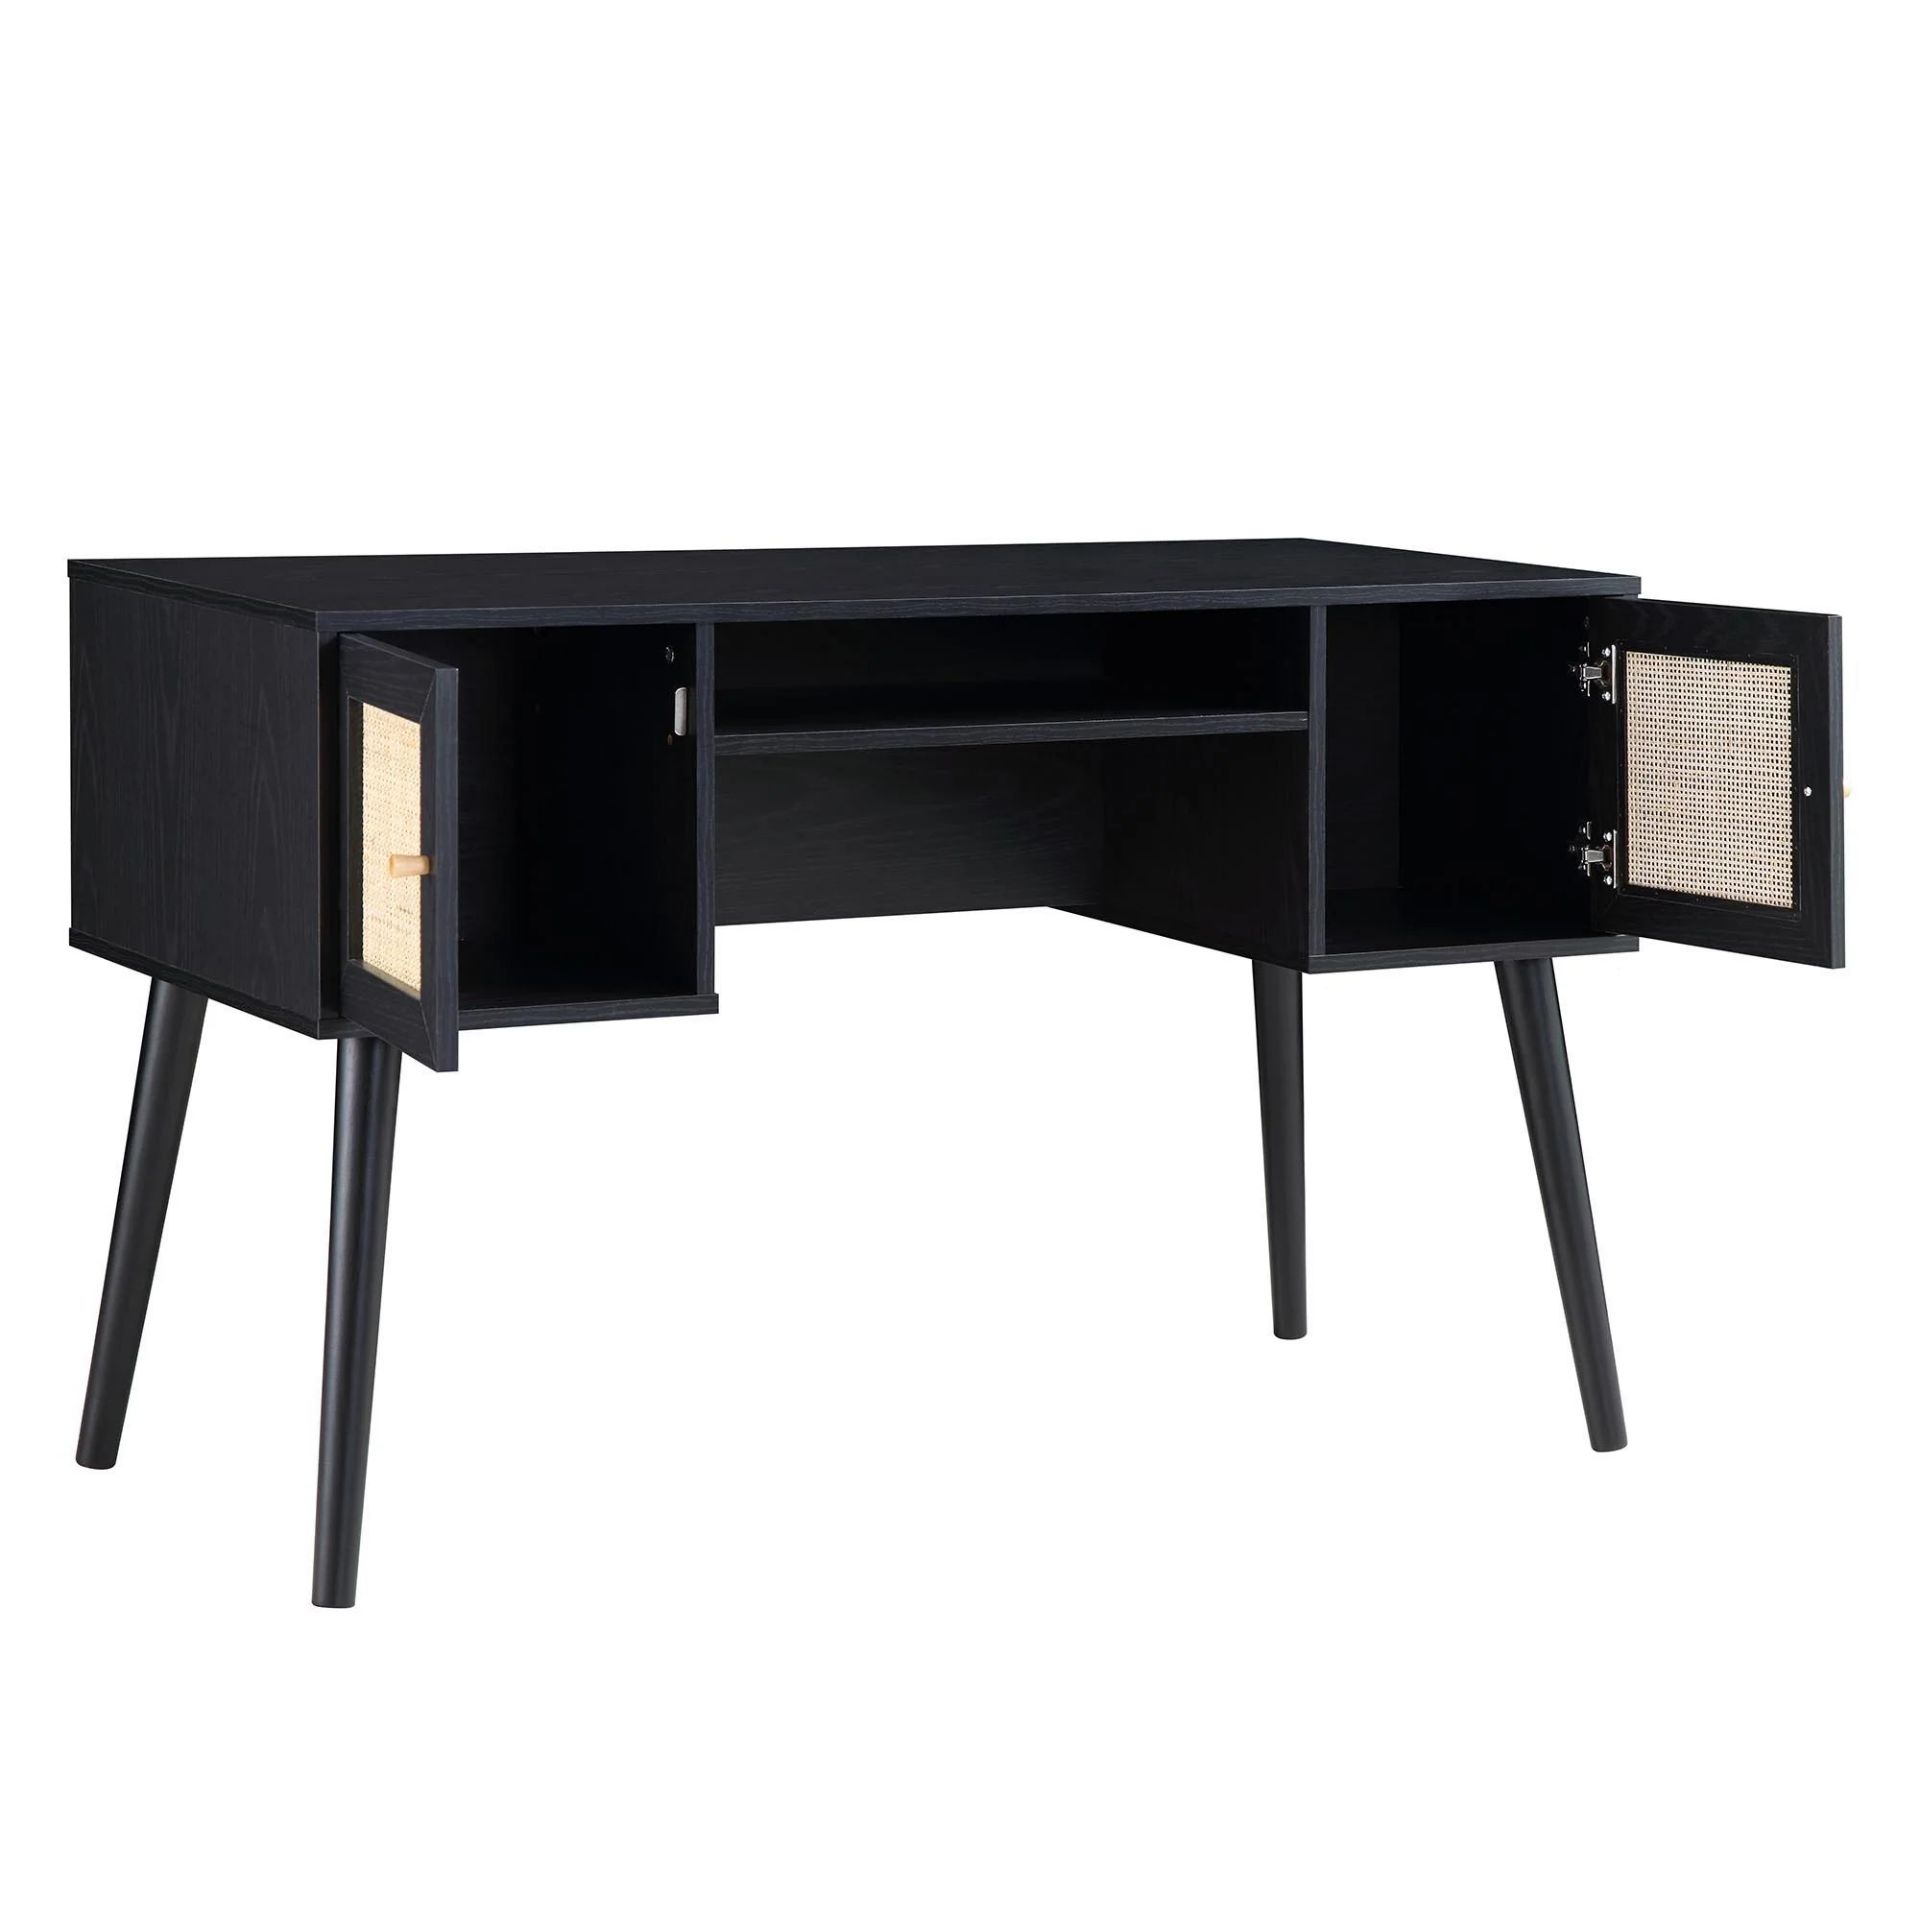 Frances Woven Rattan 2-Door Desk, Black. - ER29. RRP £239.99. Crafted from natural rattan and - Image 4 of 4